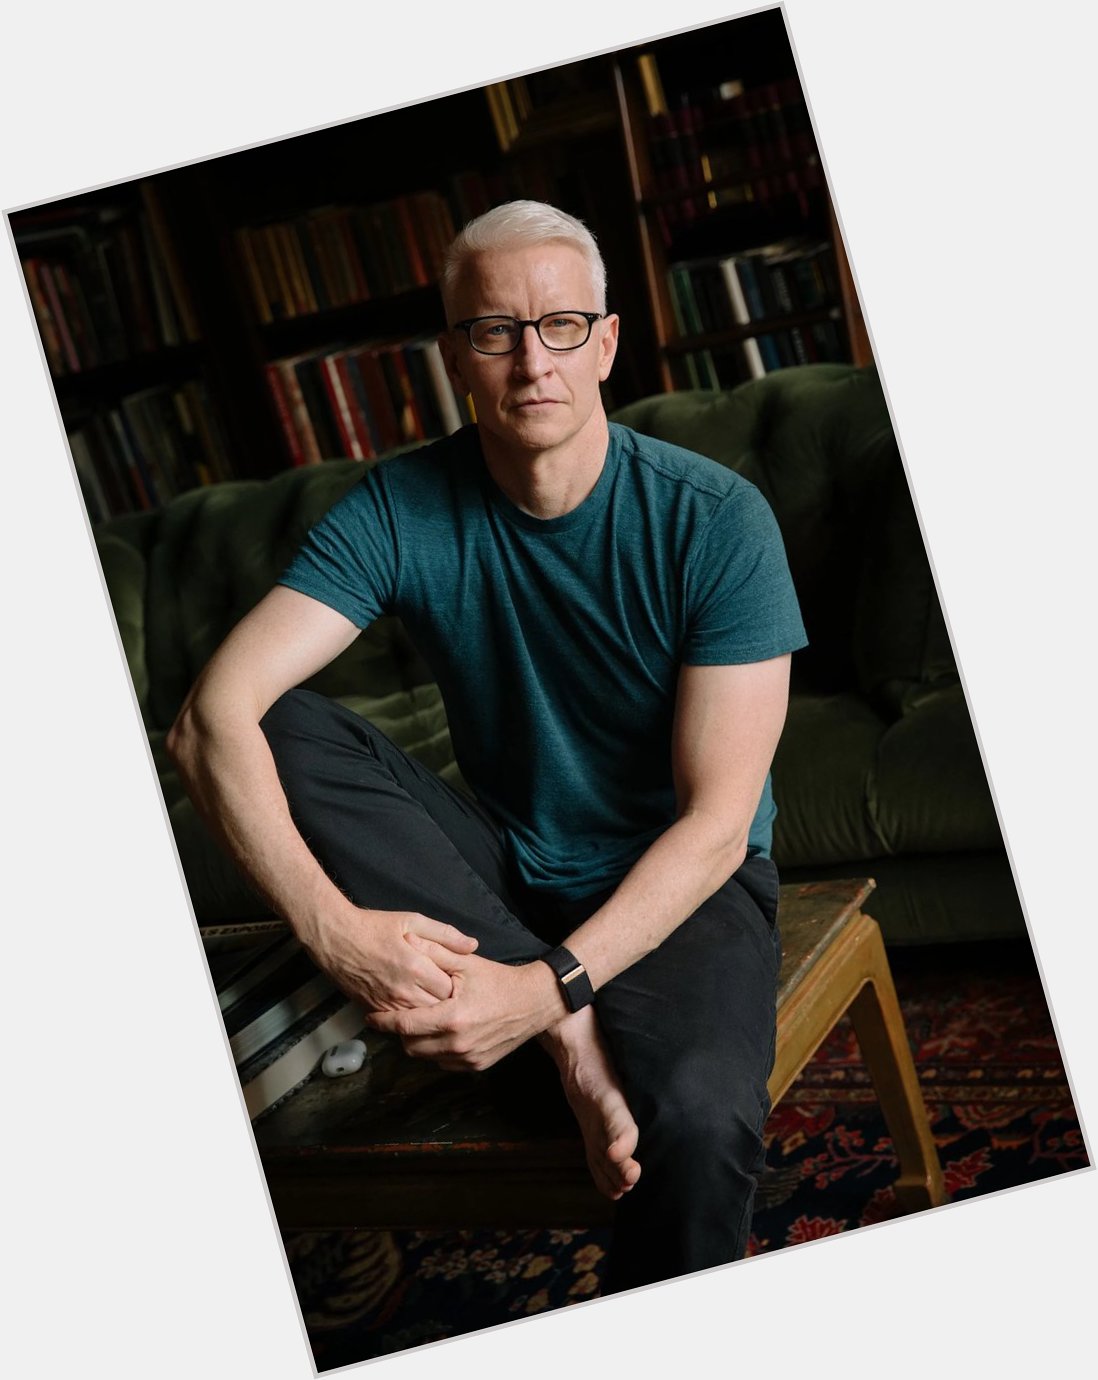 Happy Birthday to Anderson Cooper! 